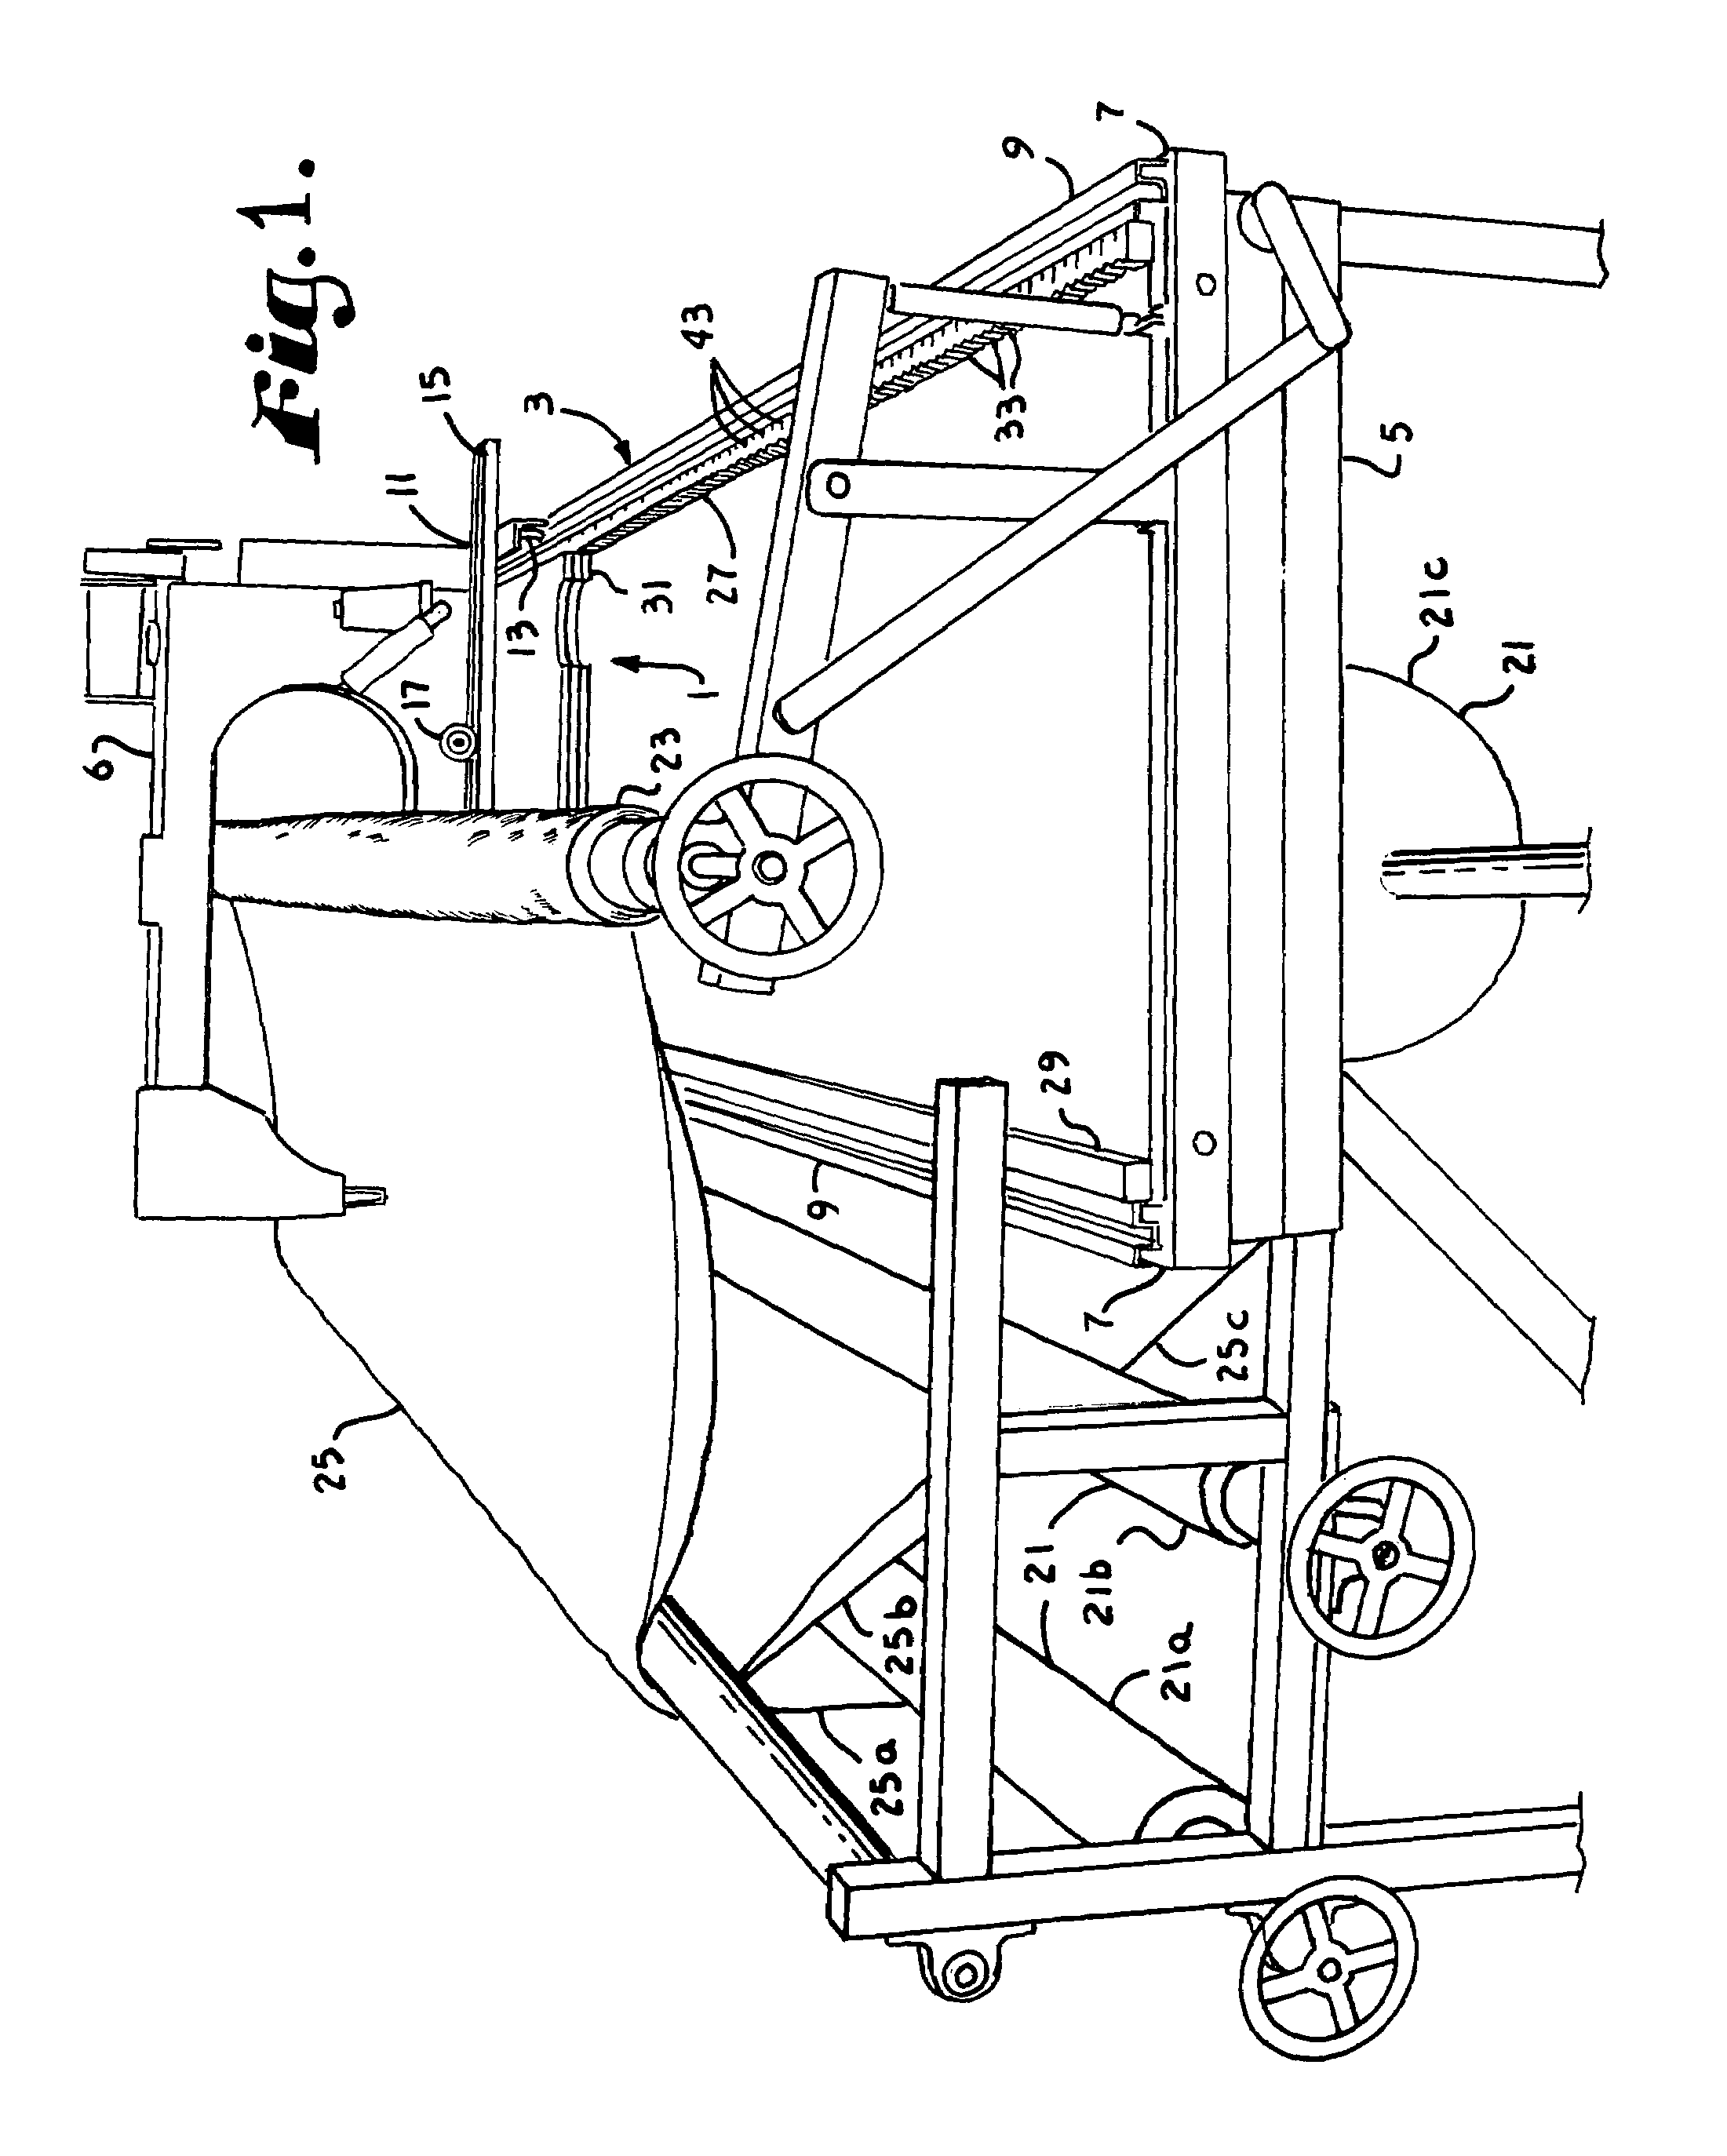 Variable pattern making jig for a quilting machine